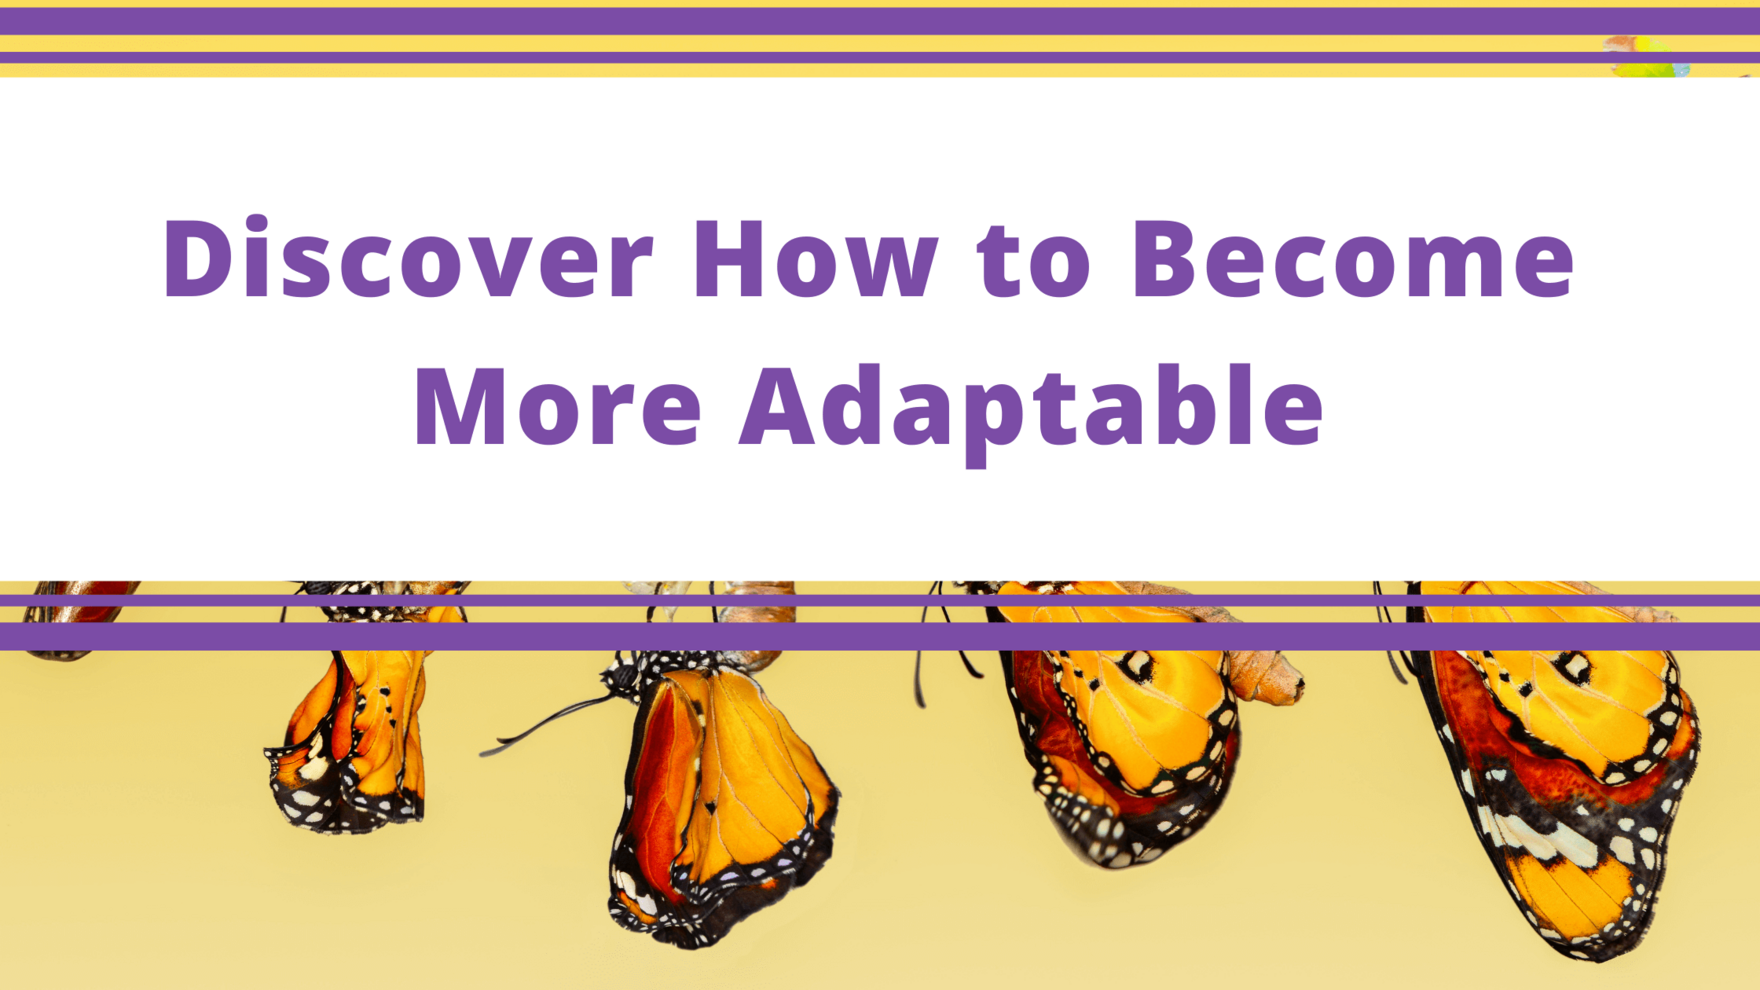 Top Tips Blog - Discover How to Become More Adaptable